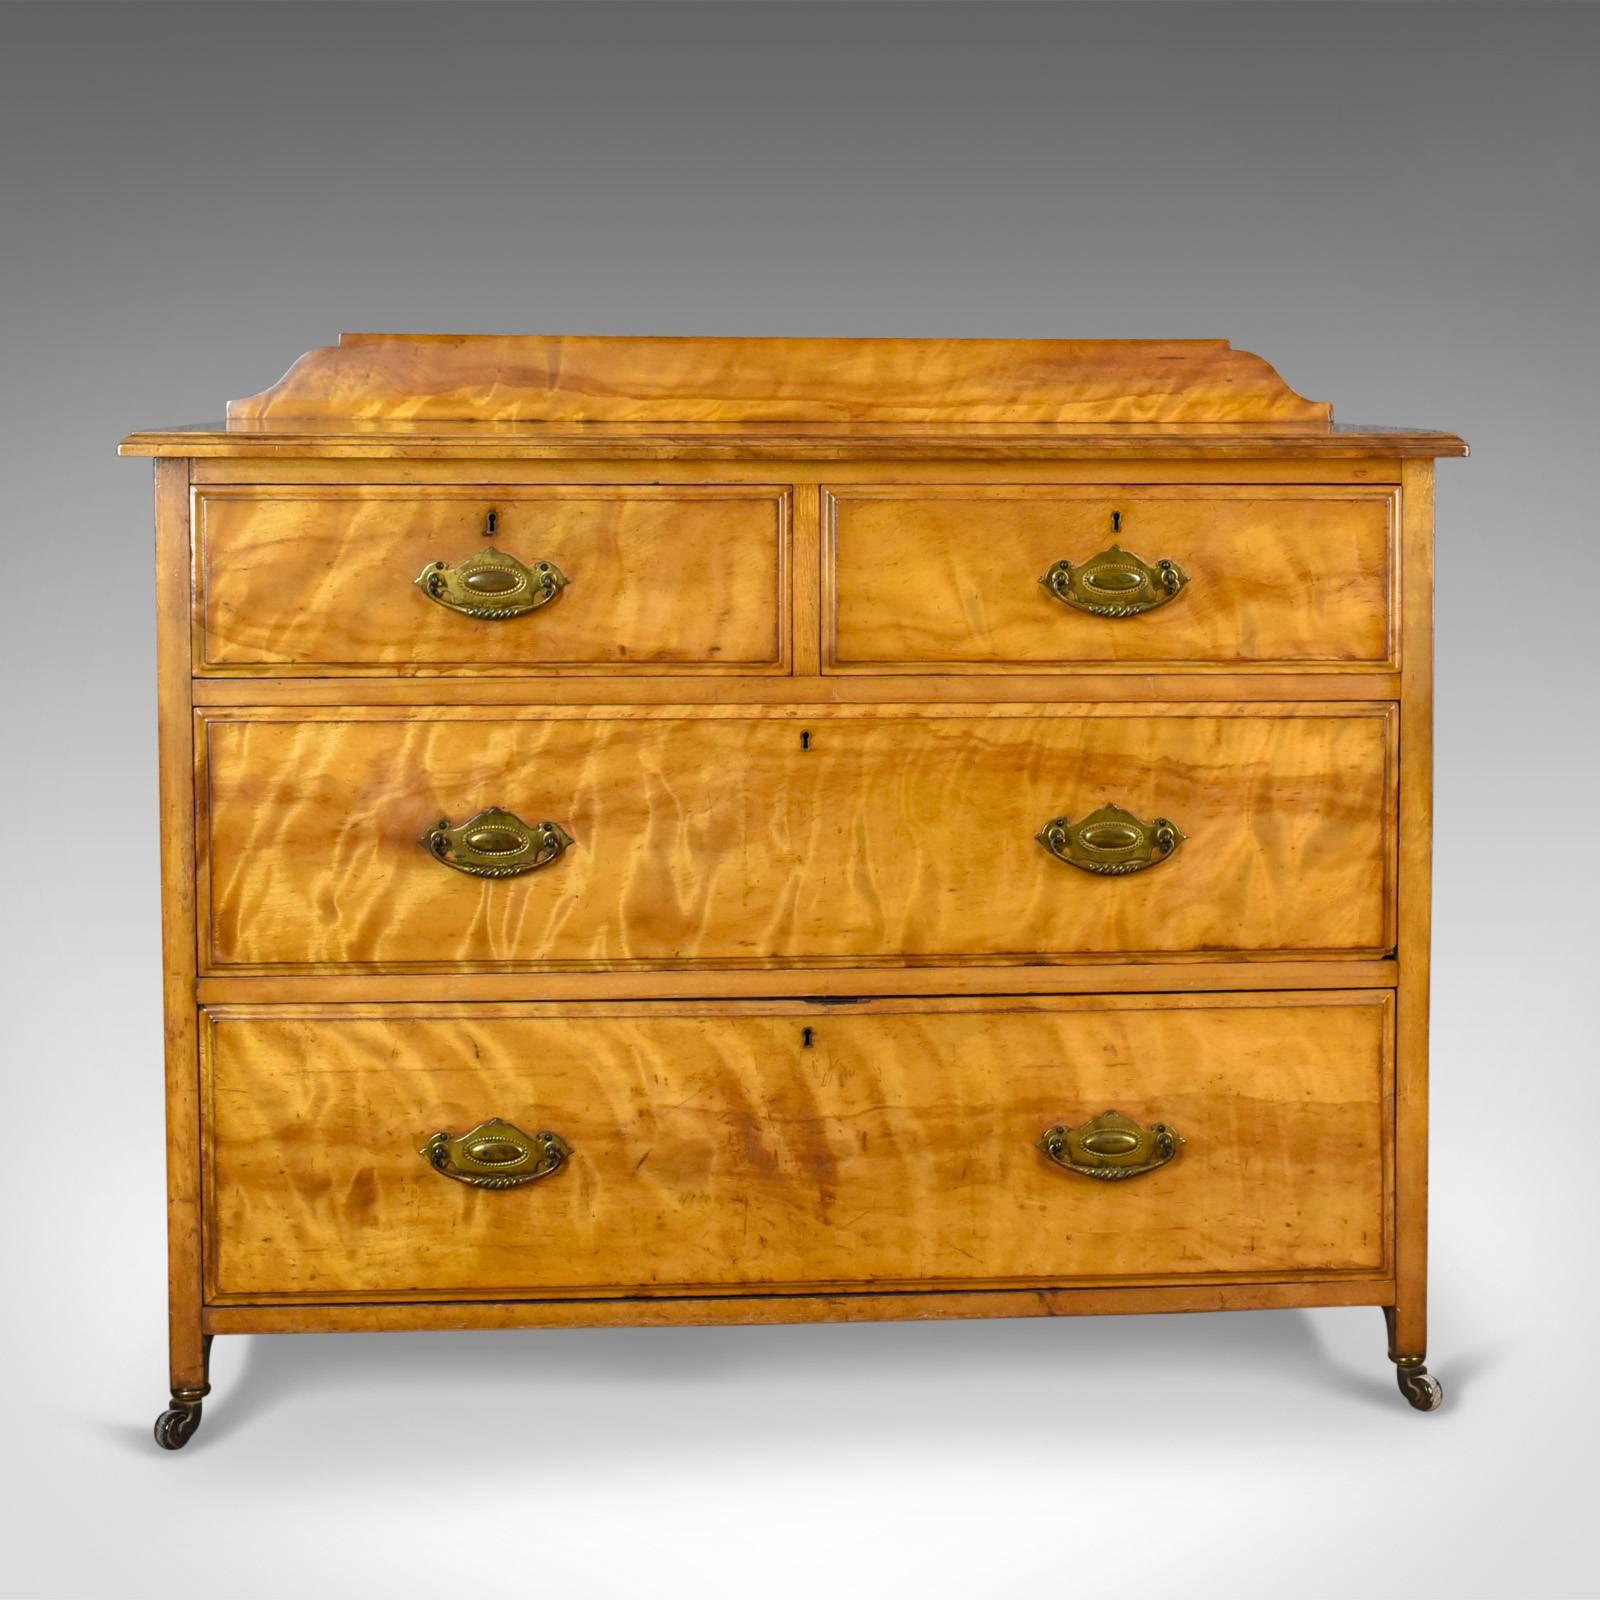 This is an antique chest of drawers in satinwood. An English, Victorian piece dating to circa 1900.

Attractive shimmer to the well figured satinwood
Good colour with a desirable aged patina
Configured in a 'two over two' graduated